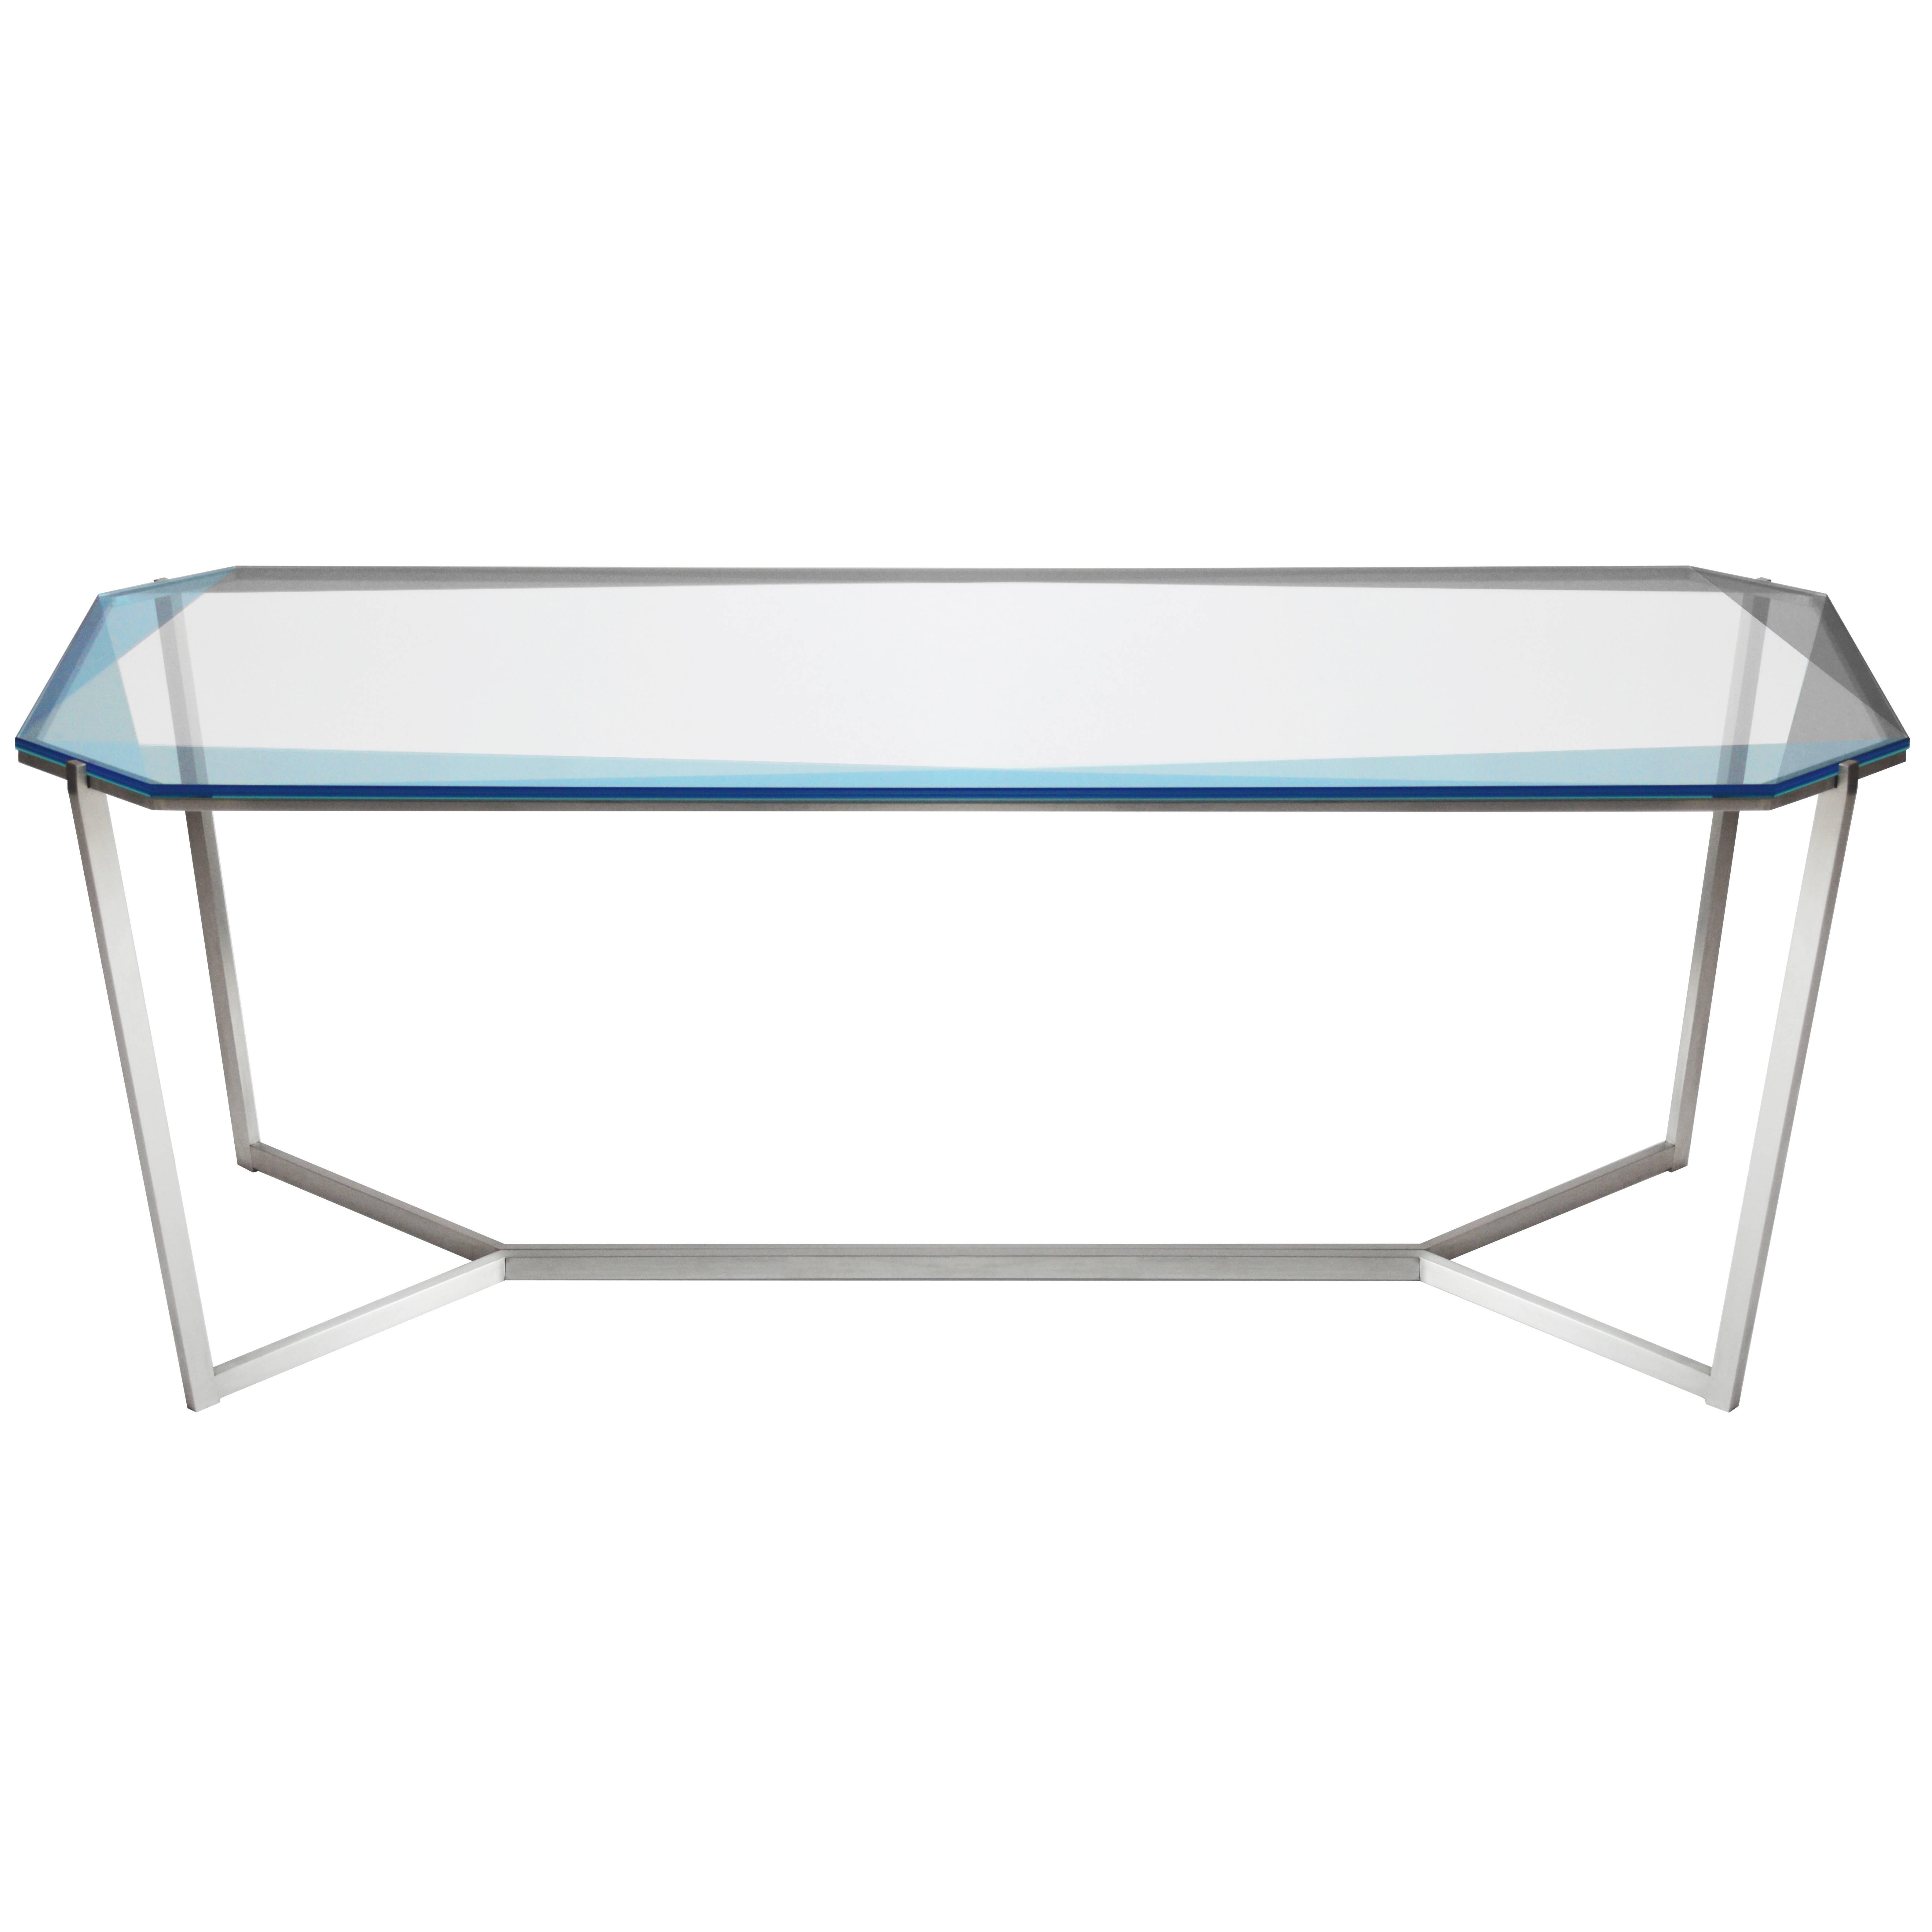 Gem Rectangular Dining Table/ Blue Glass with Stainless Steel Base by Debra Folz